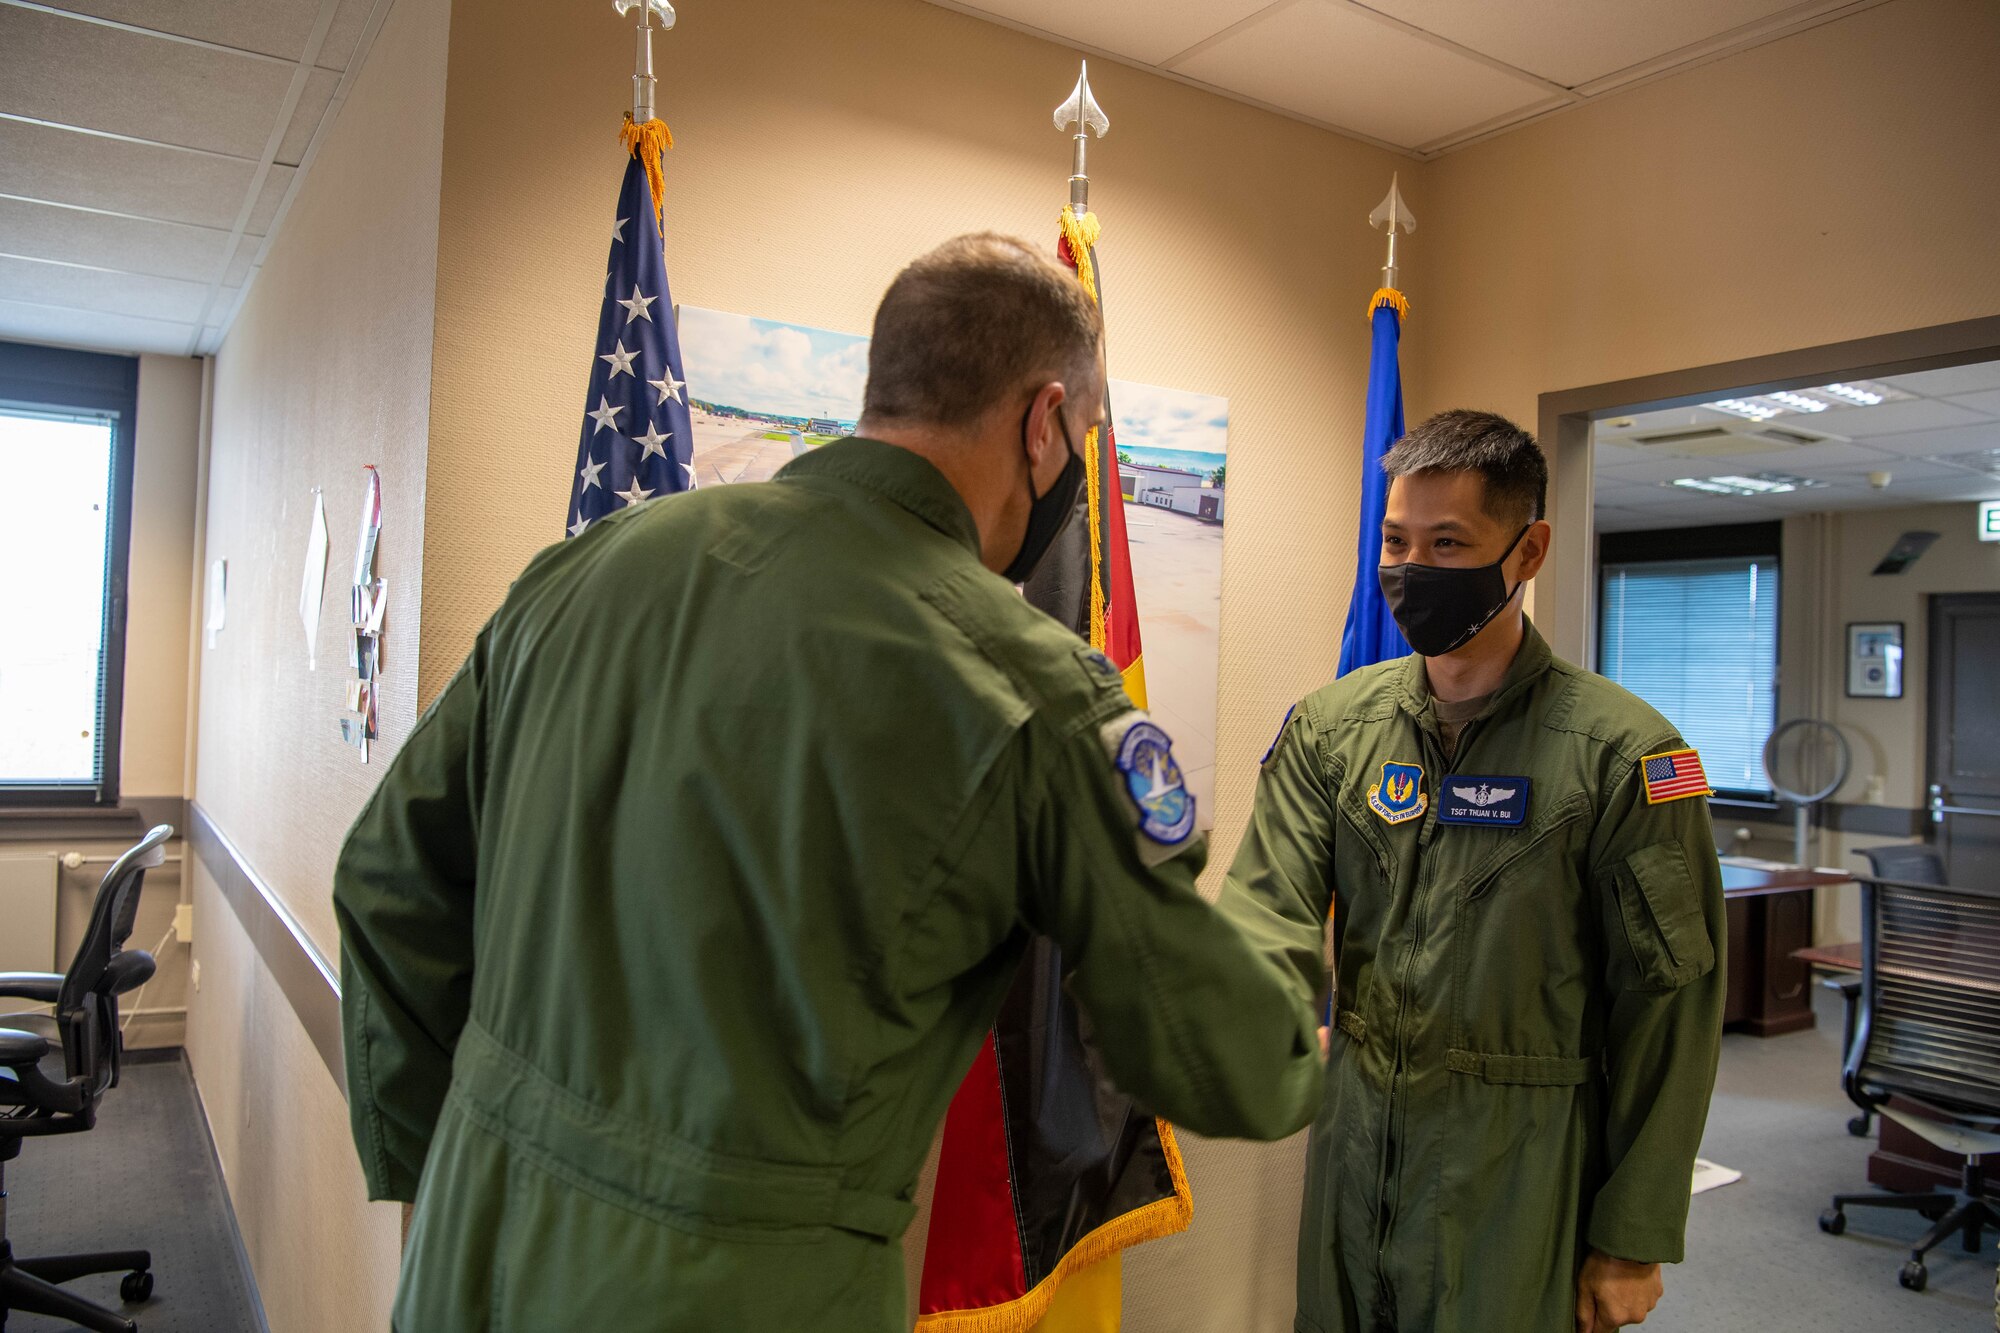 Two Airmen shaking hands.